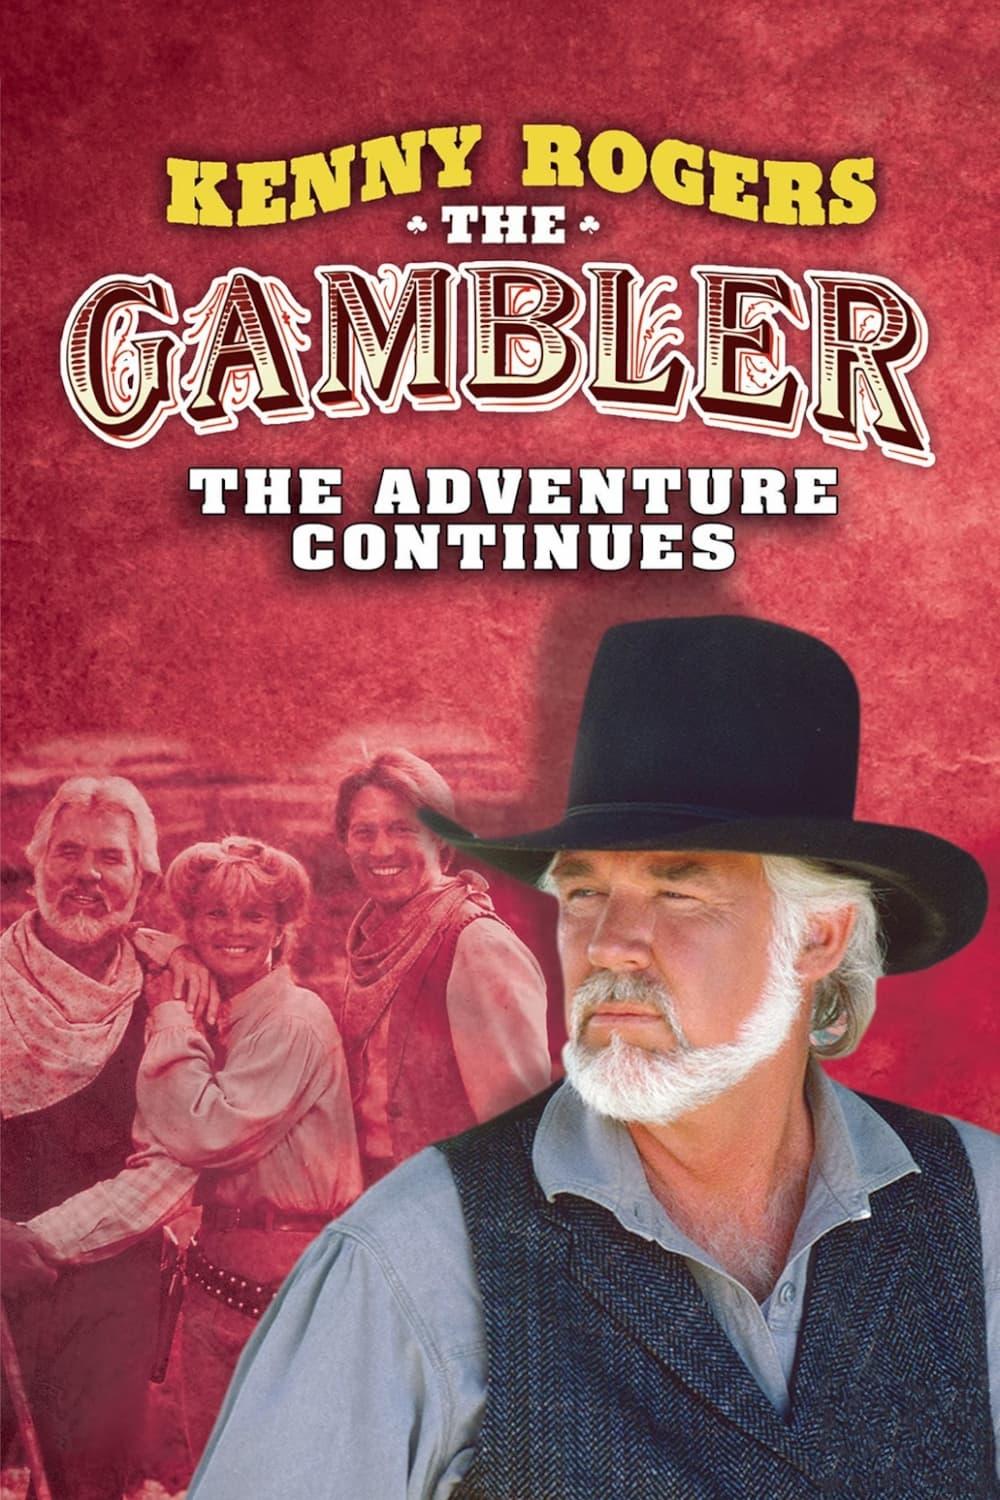 The Gambler: The Adventure Continues poster